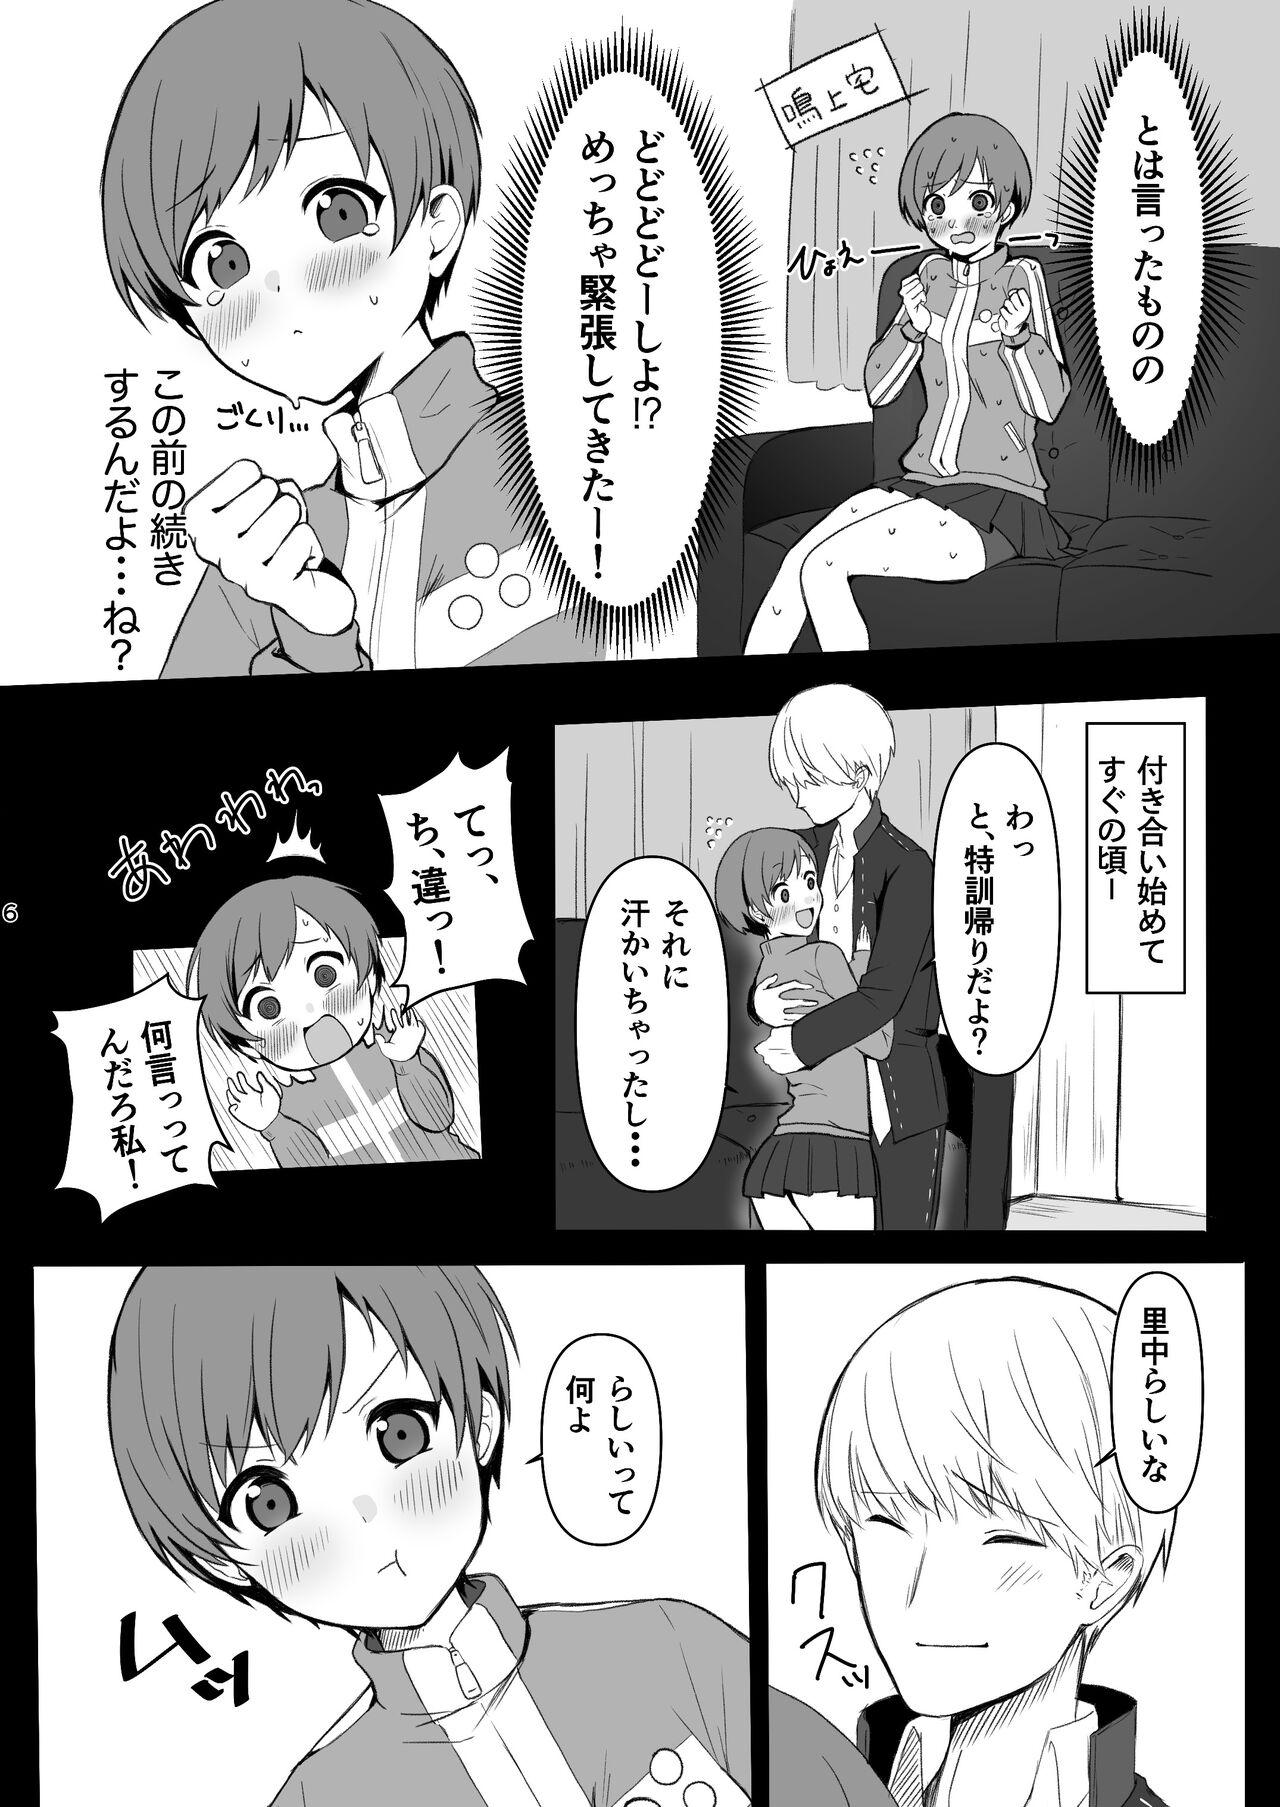 Submission 里中千枝は我慢できない - Persona 4 From - Page 6